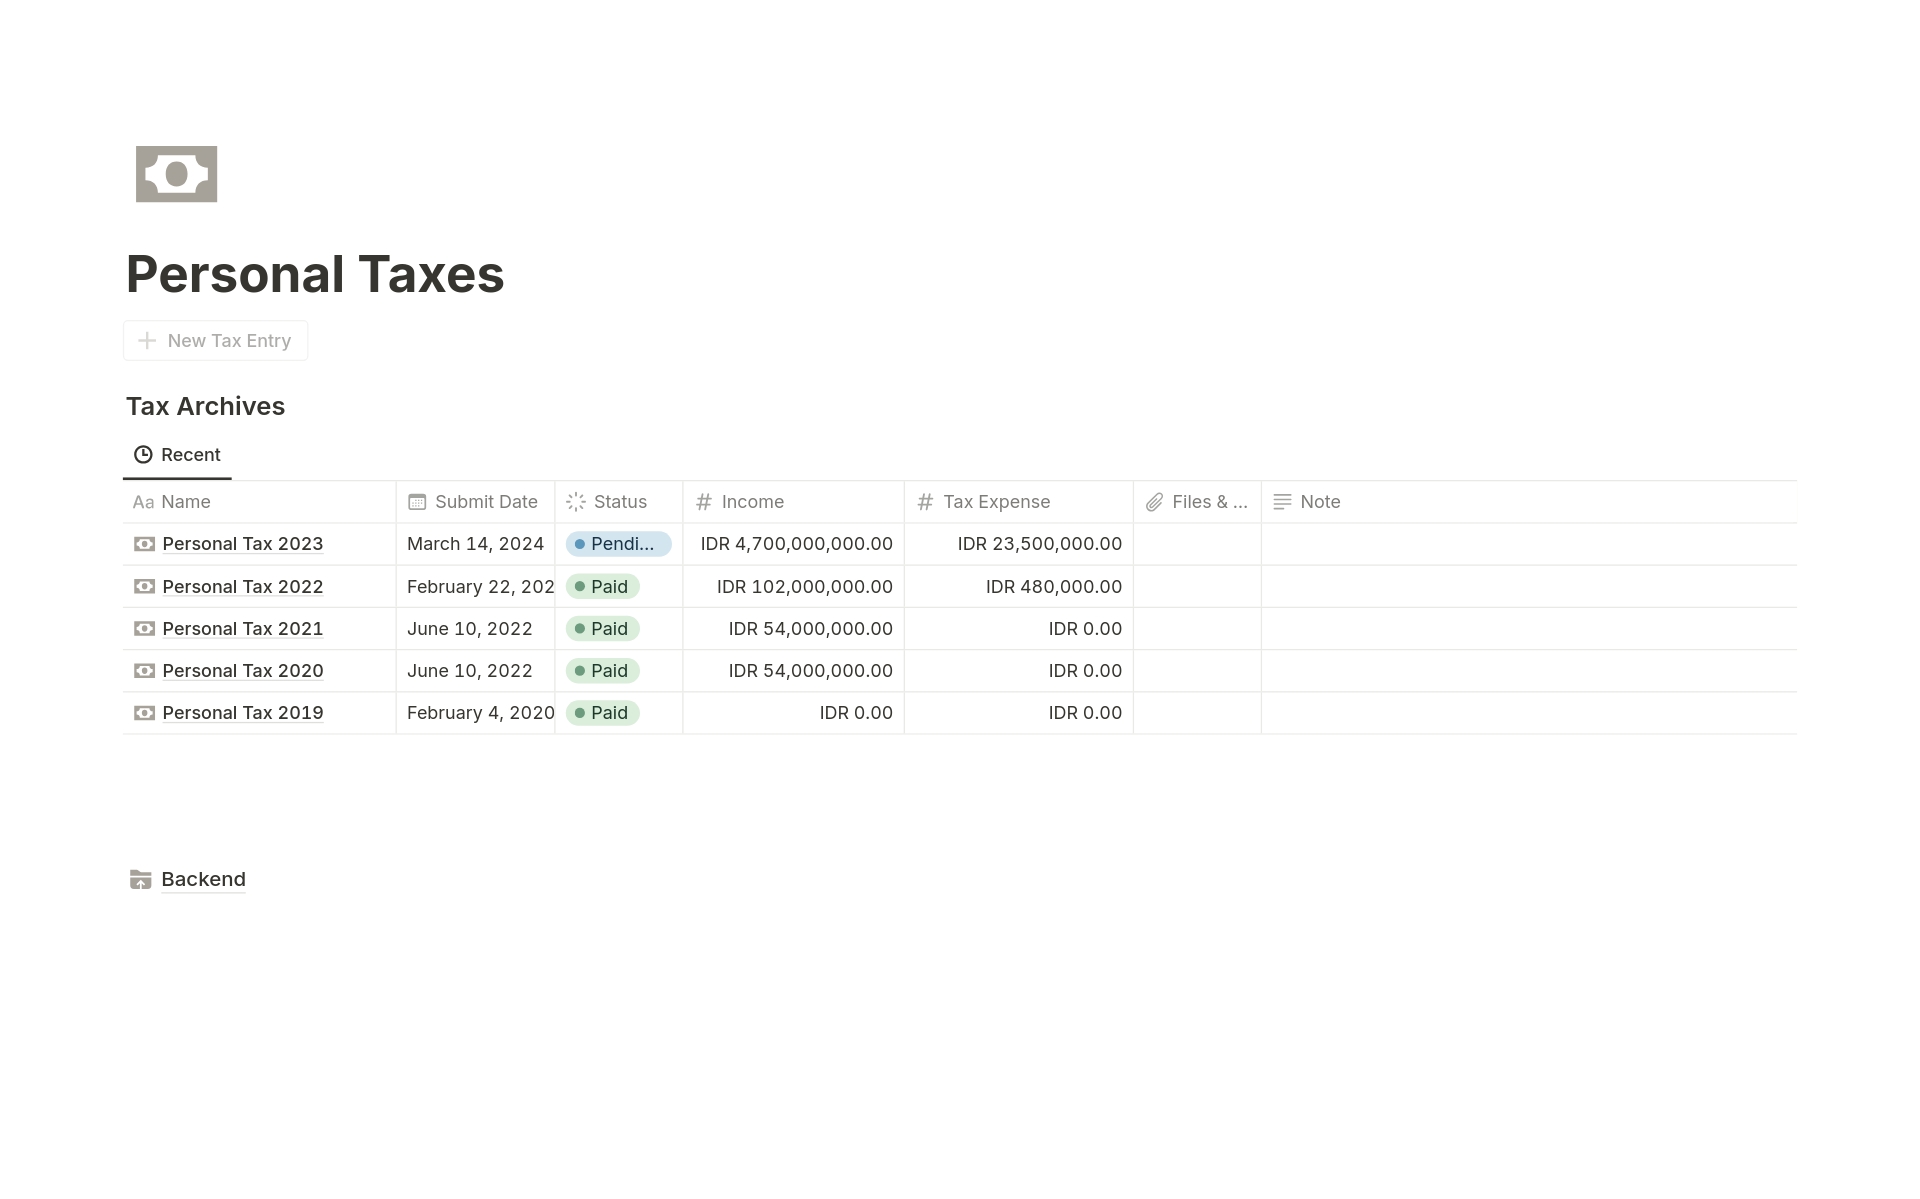 Easily manage personal taxes with our Notion template. Organize income, tax expenses, submission dates, status, and file information effortlessly. Simplify tax tracking and stay organized!